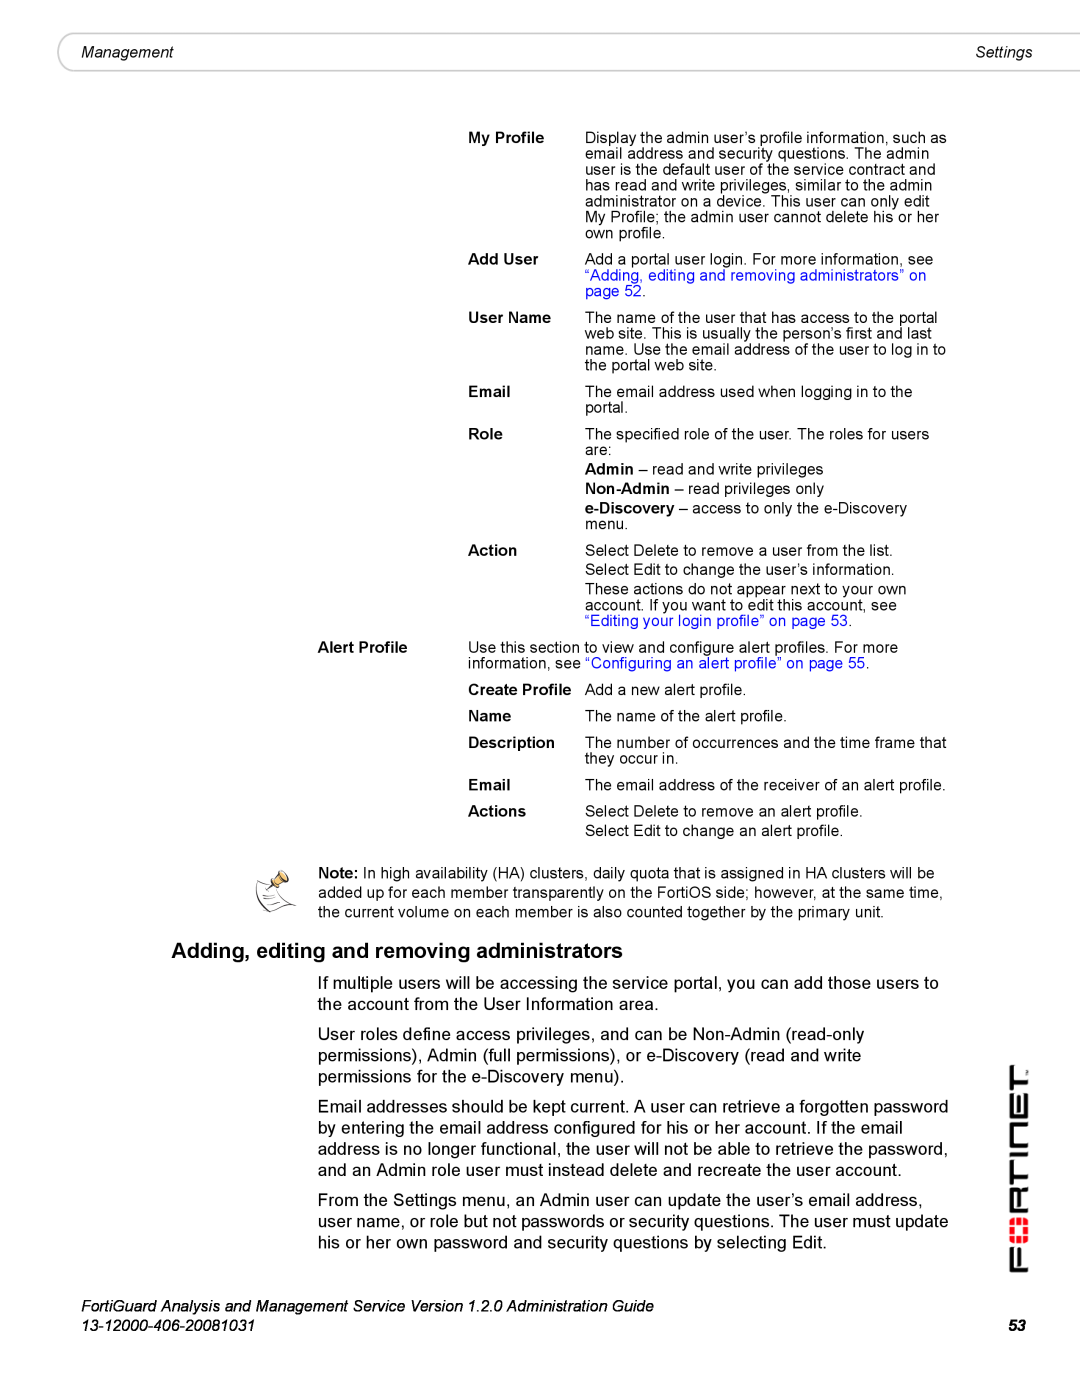 Fortinet 1.2.0 manual Adding, editing and removing administrators 